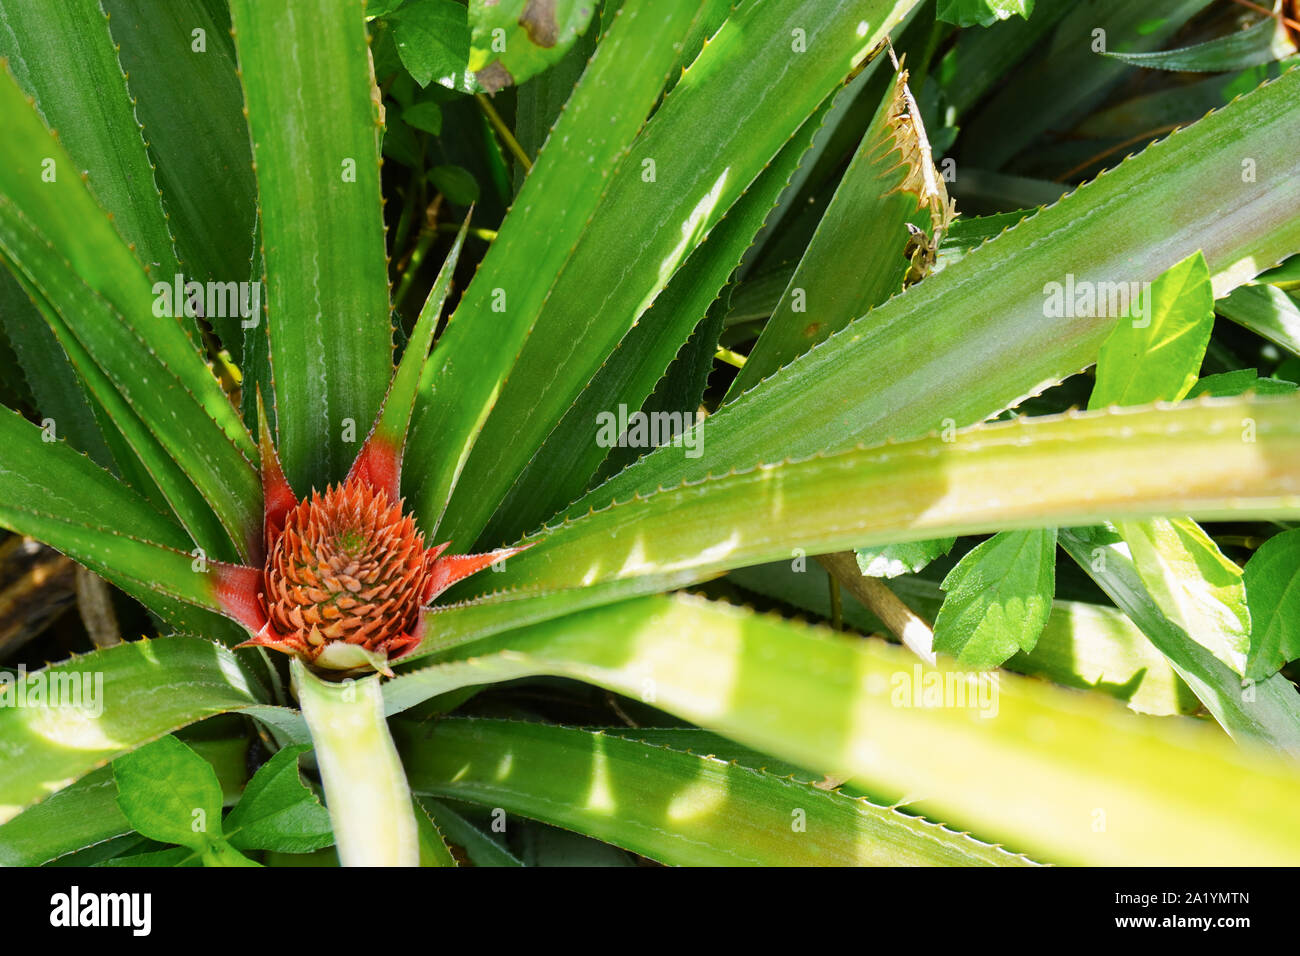 The red bud of a pineapple starts to grow in the midst of green spiky leaves in a pineapple field on the island of Moorea in French Polynesia Stock Photo